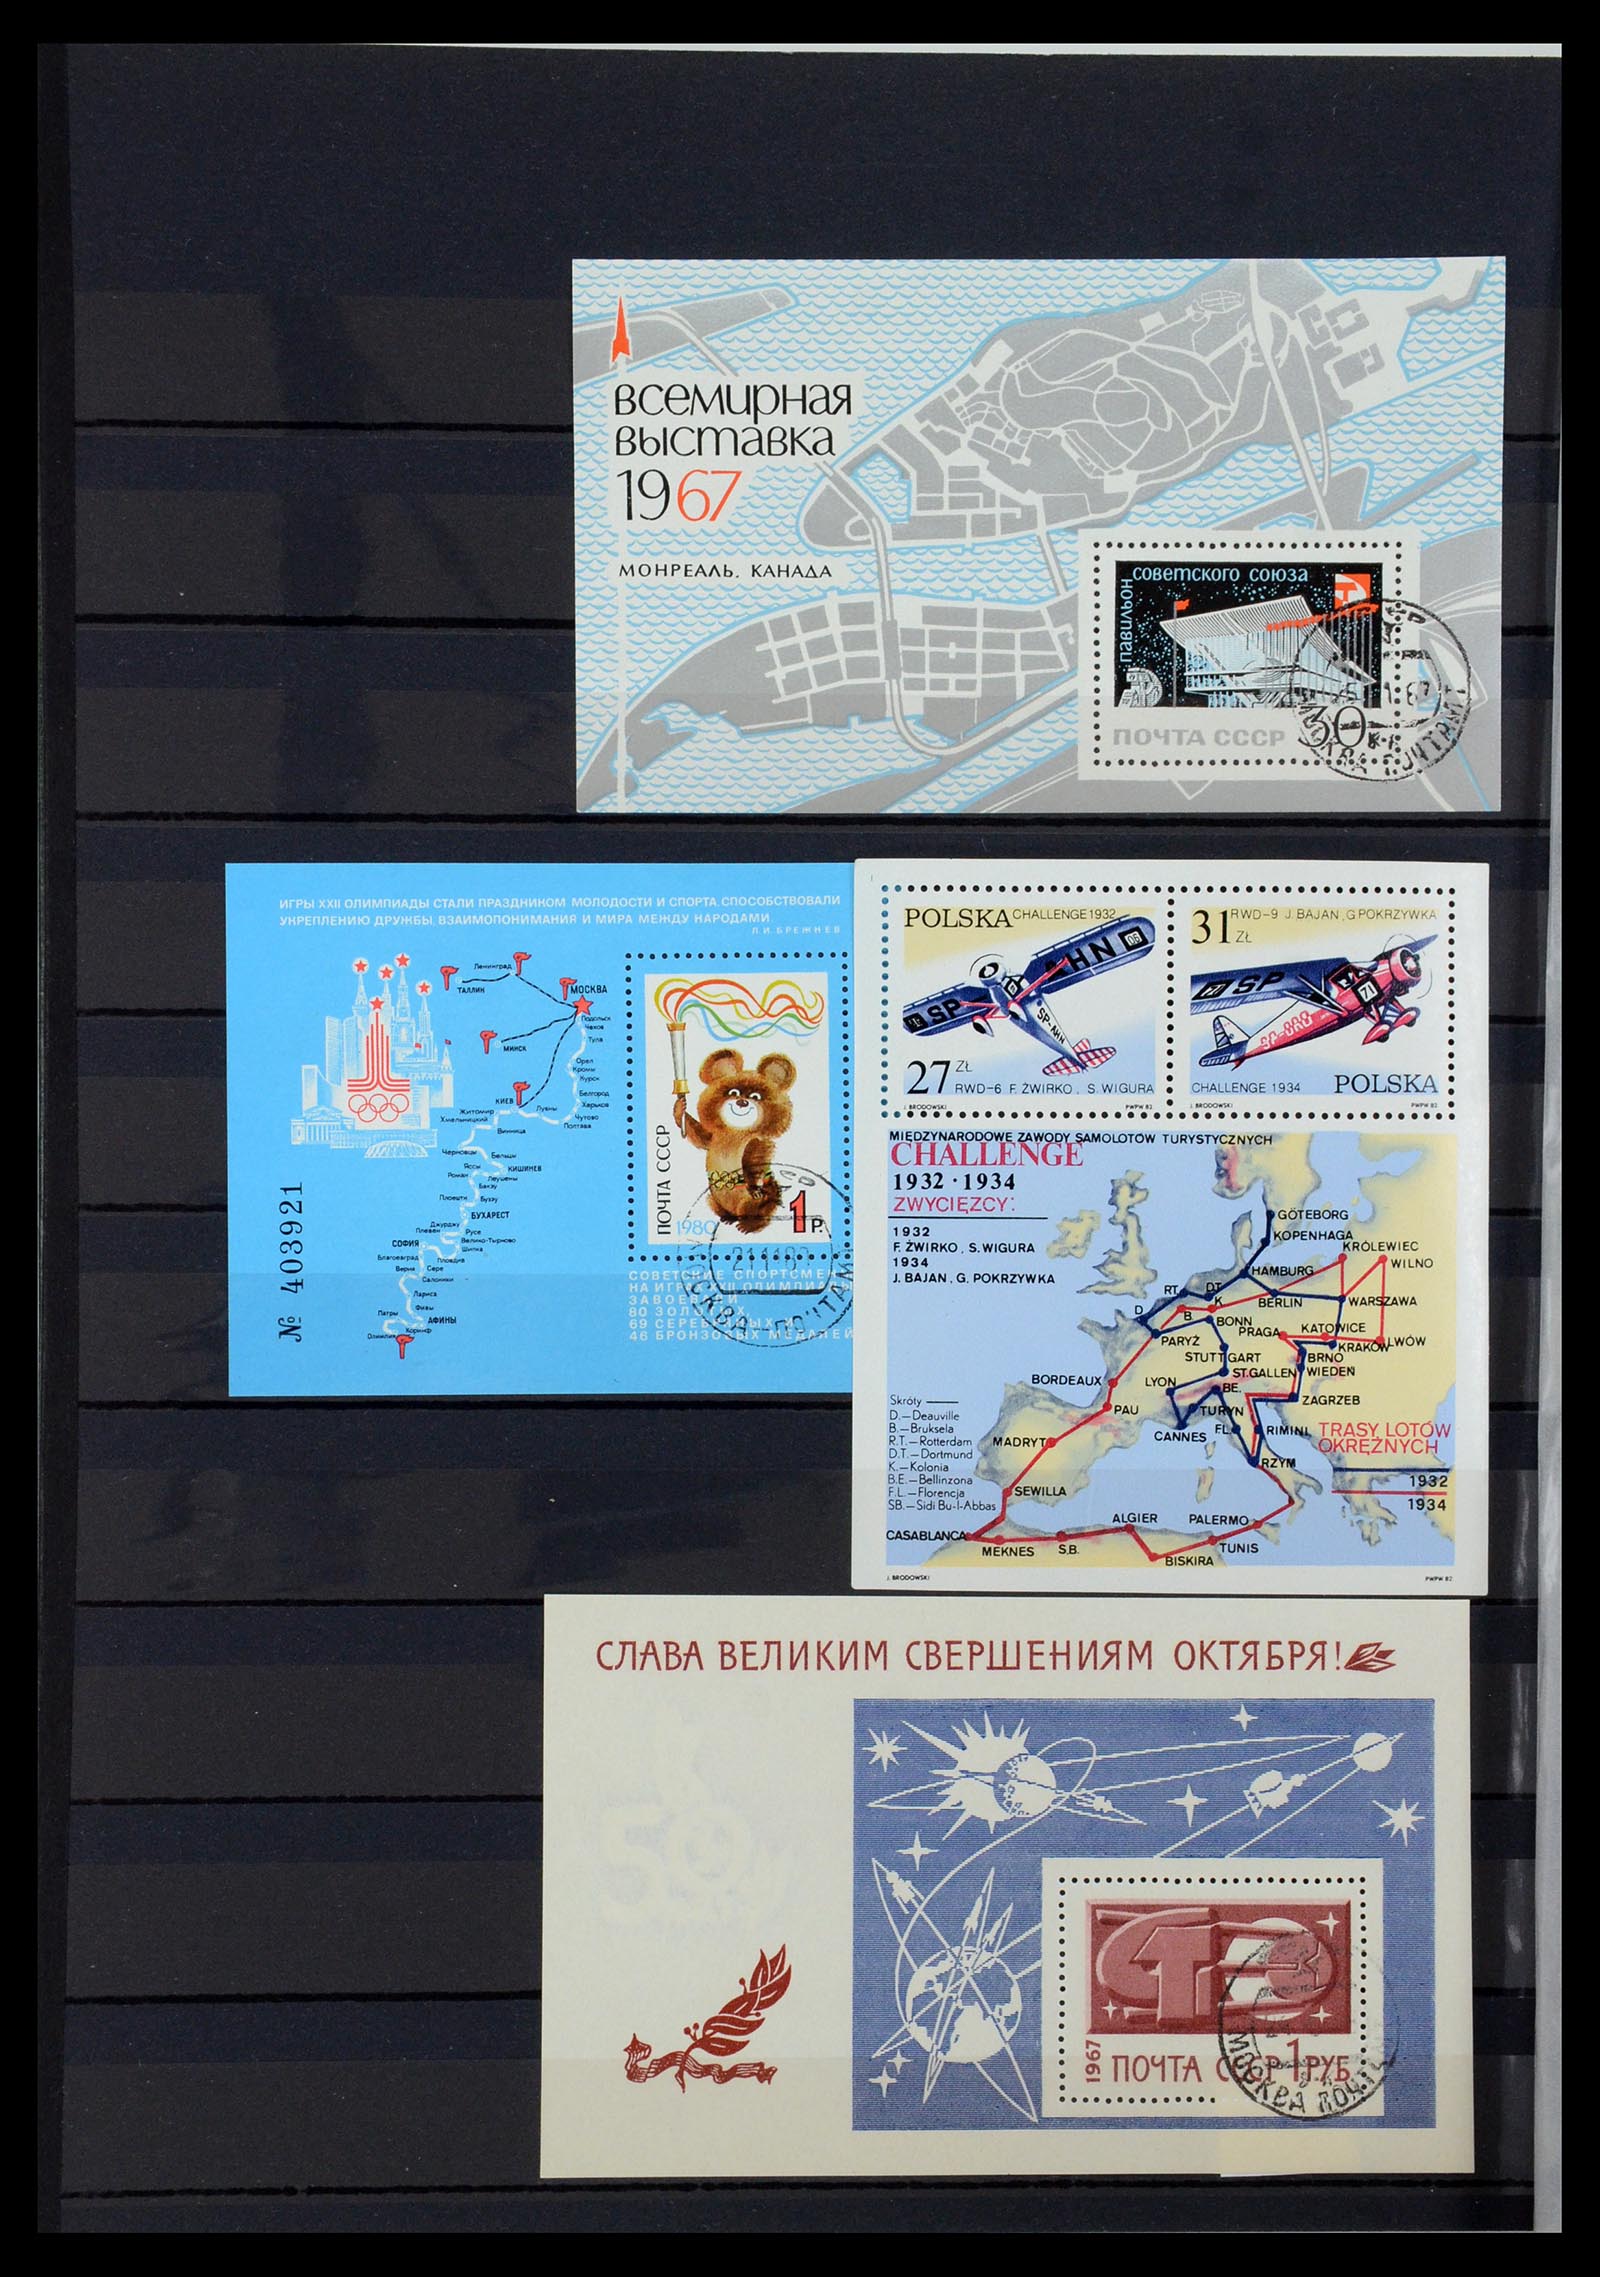 36238 090 - Stamp collection 36238 Motif maps 1900-2000.